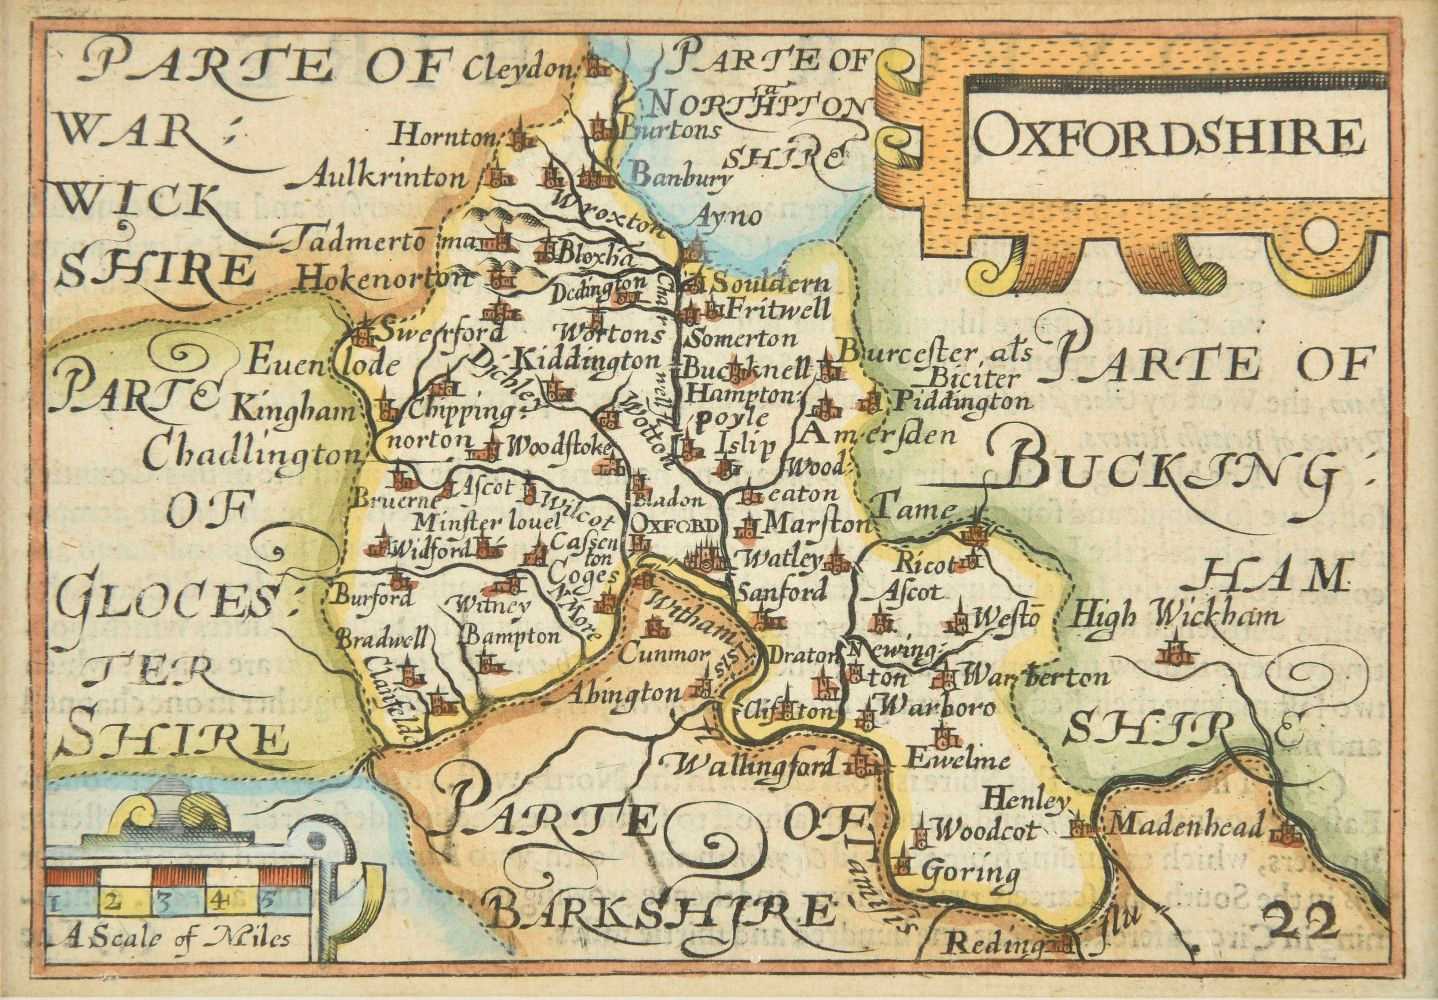 Lot 61 - Oxfordshire Buckinghamshire & Berkshire. A mixed collection of forty-six maps, 17th - 19th century